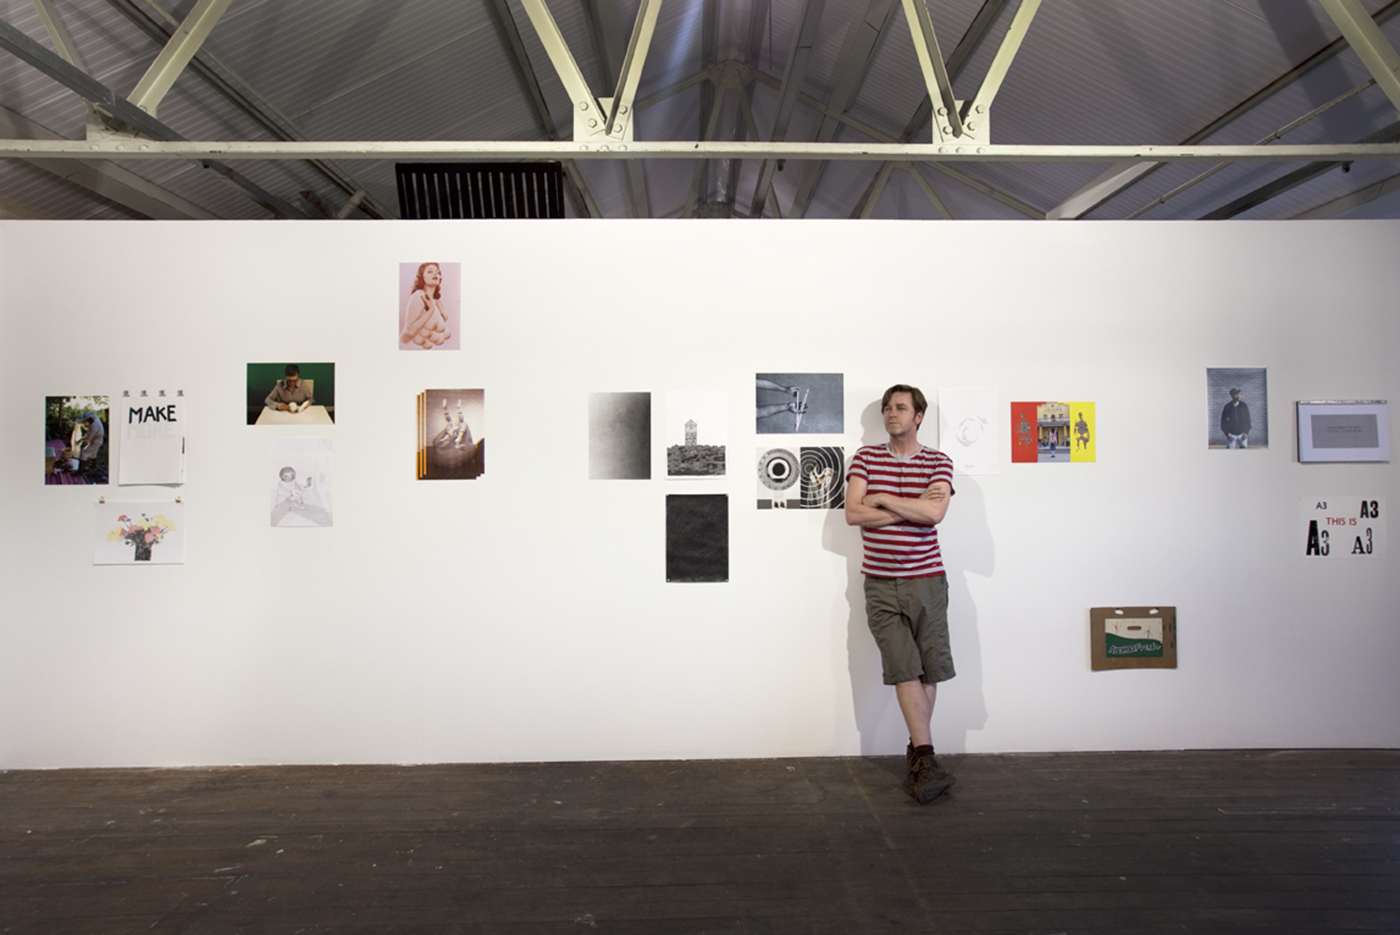 Trevor Pitt in A3 Project Space